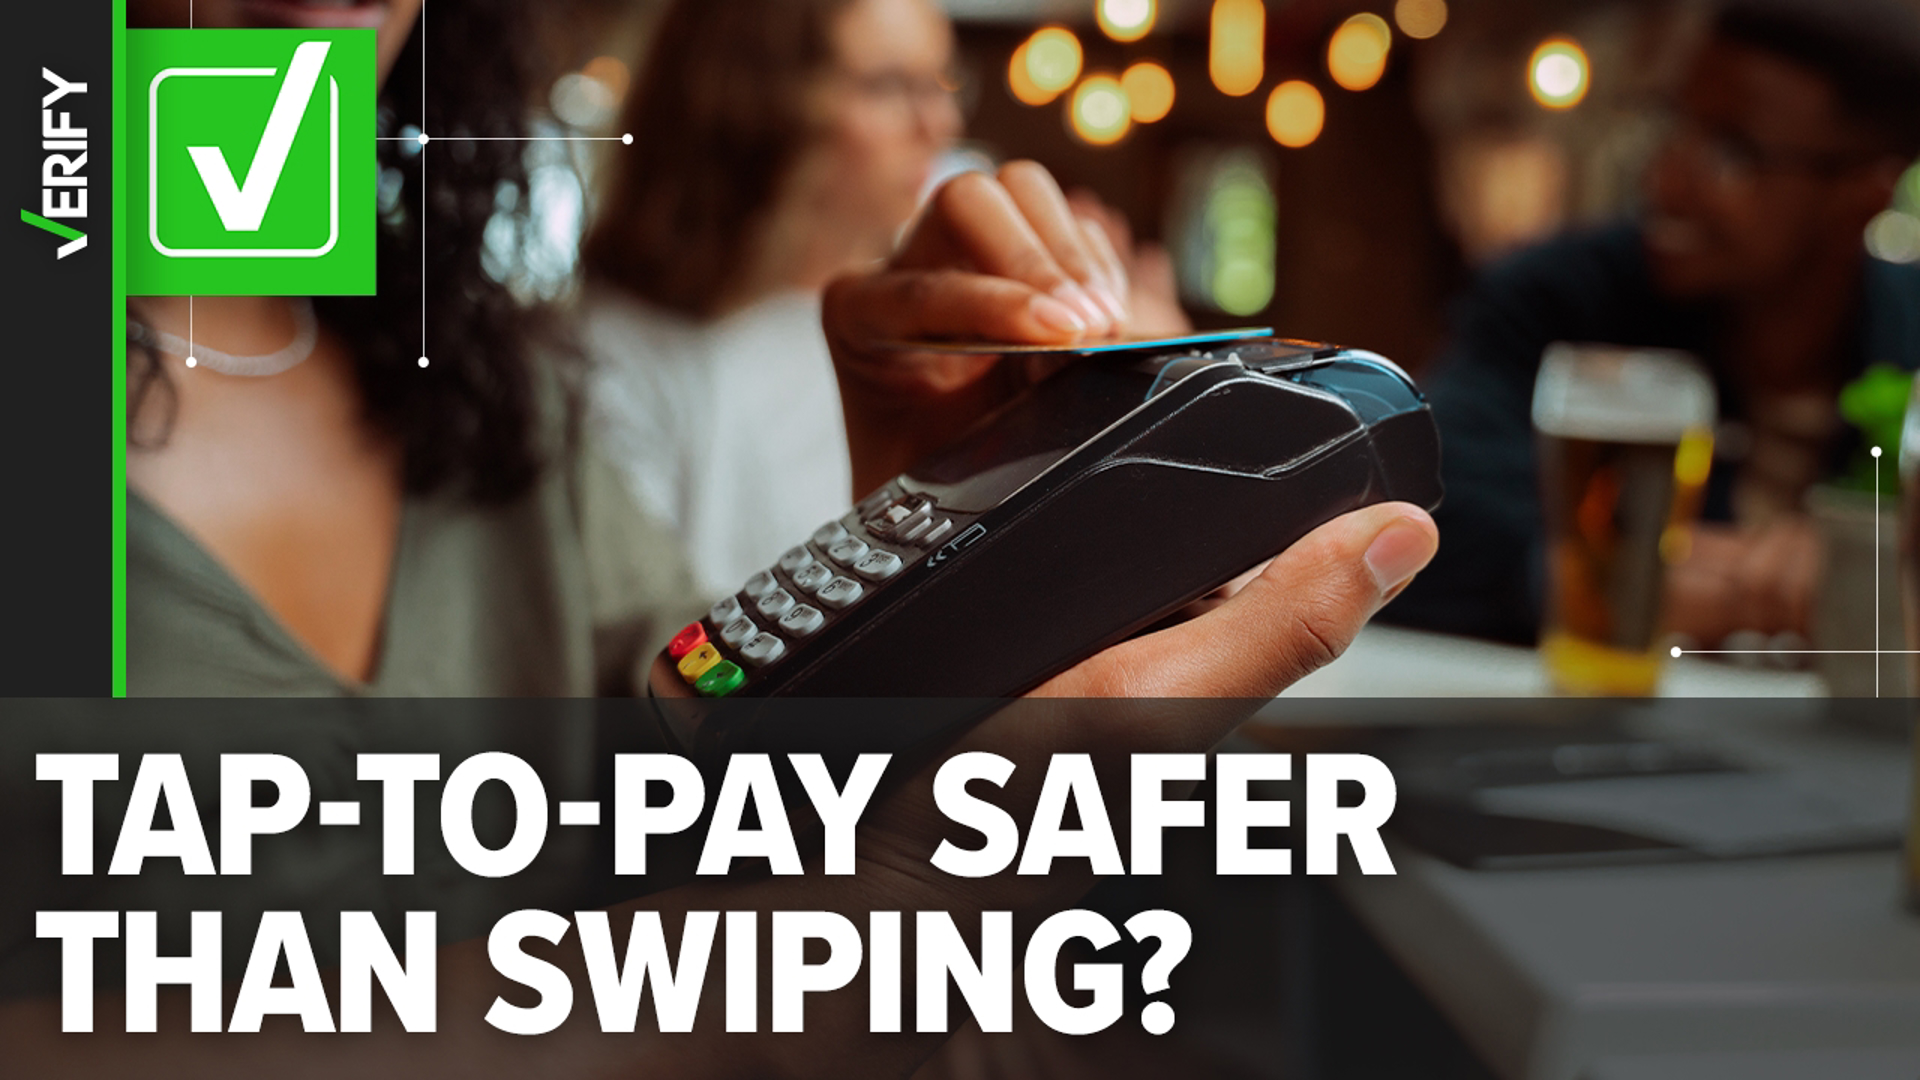 Using contactless methods protects you from scams that steal your information when swiping or inserting your credit card.